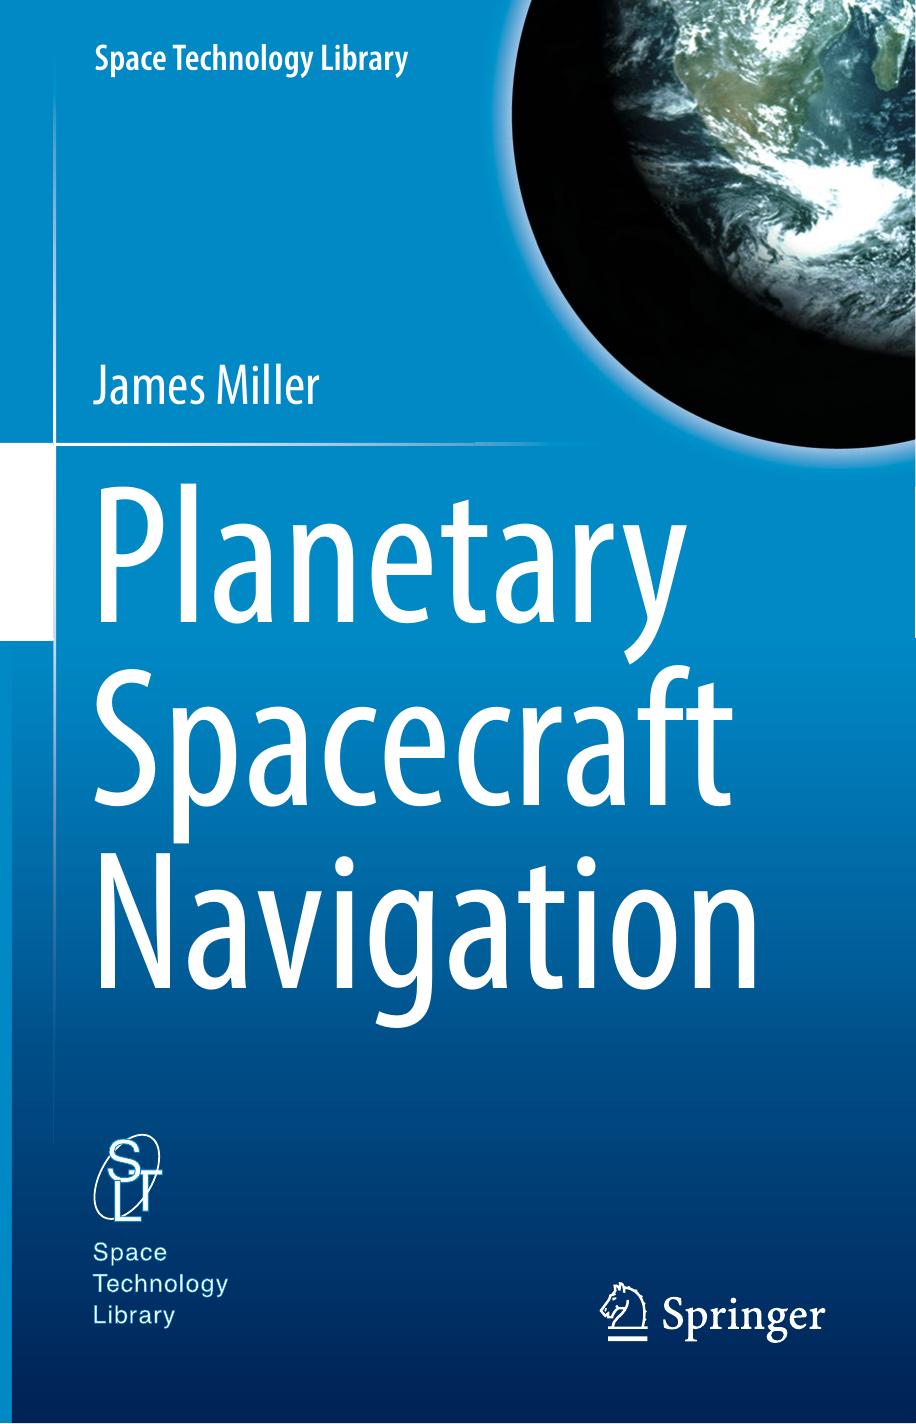 Planetary Spacecraft Navigation by James Miller